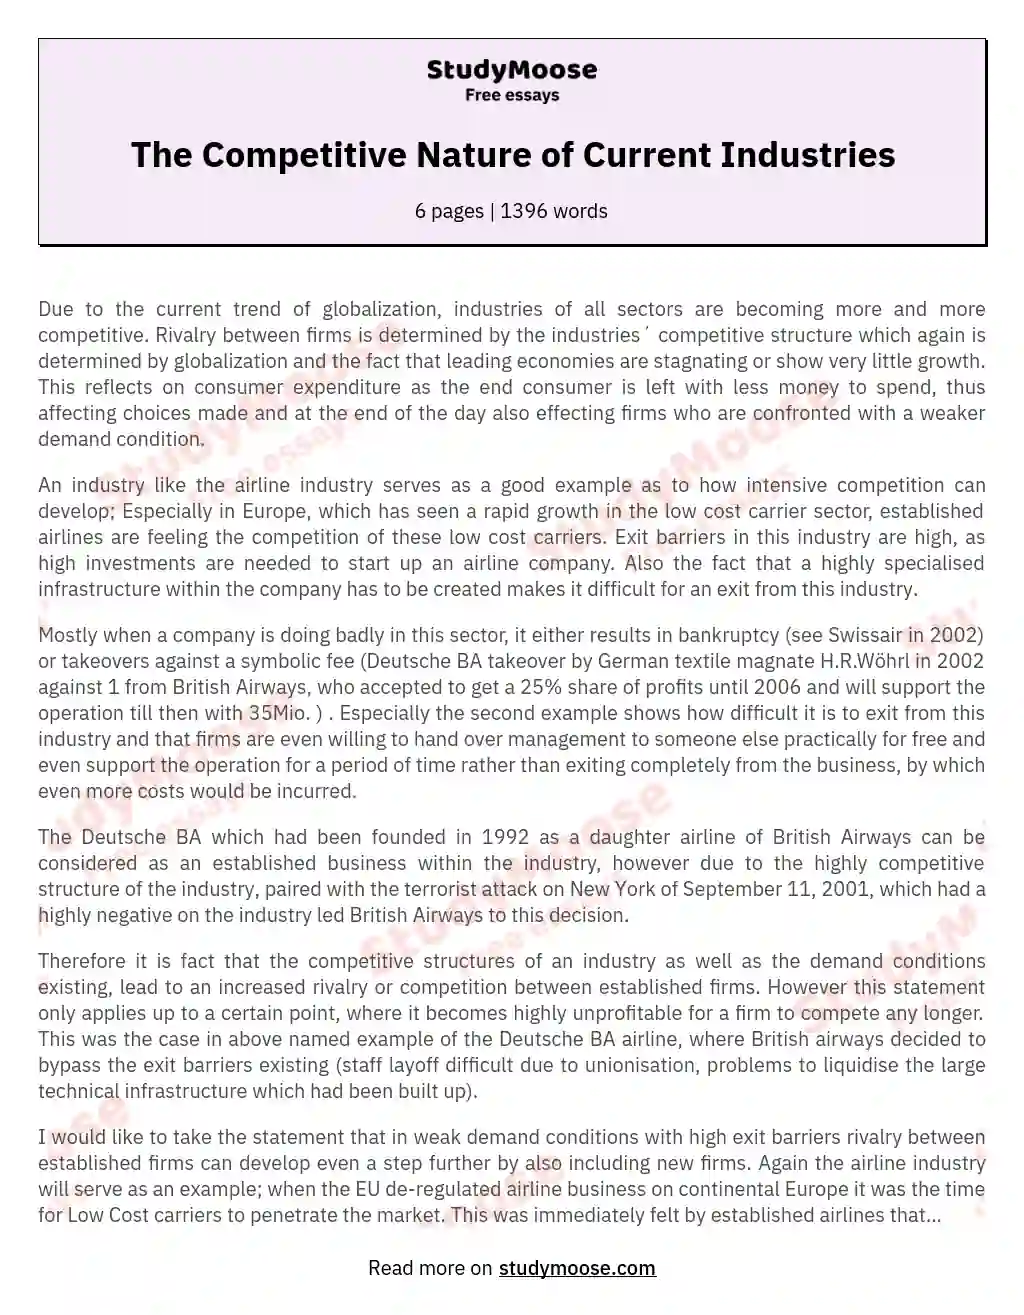 The Competitive Nature of Current Industries essay